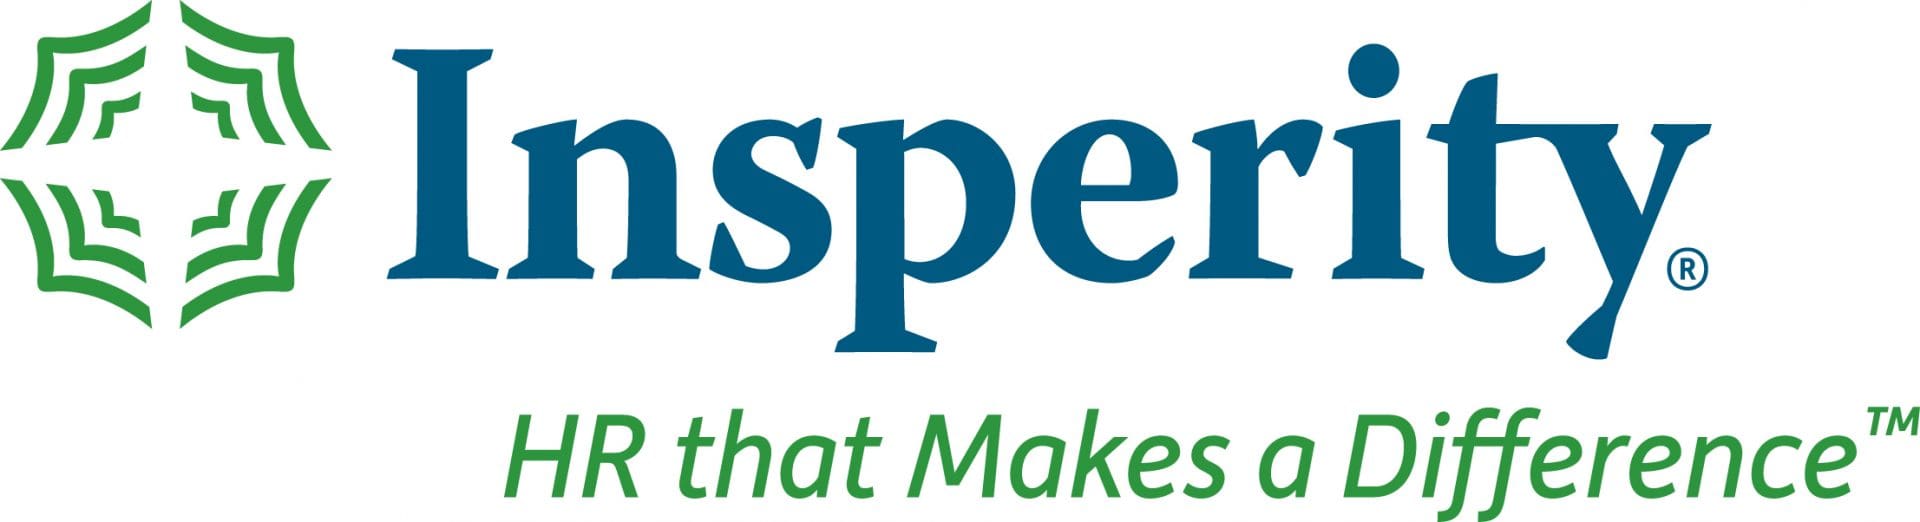 The logo for inspirity hr that makes a difference.